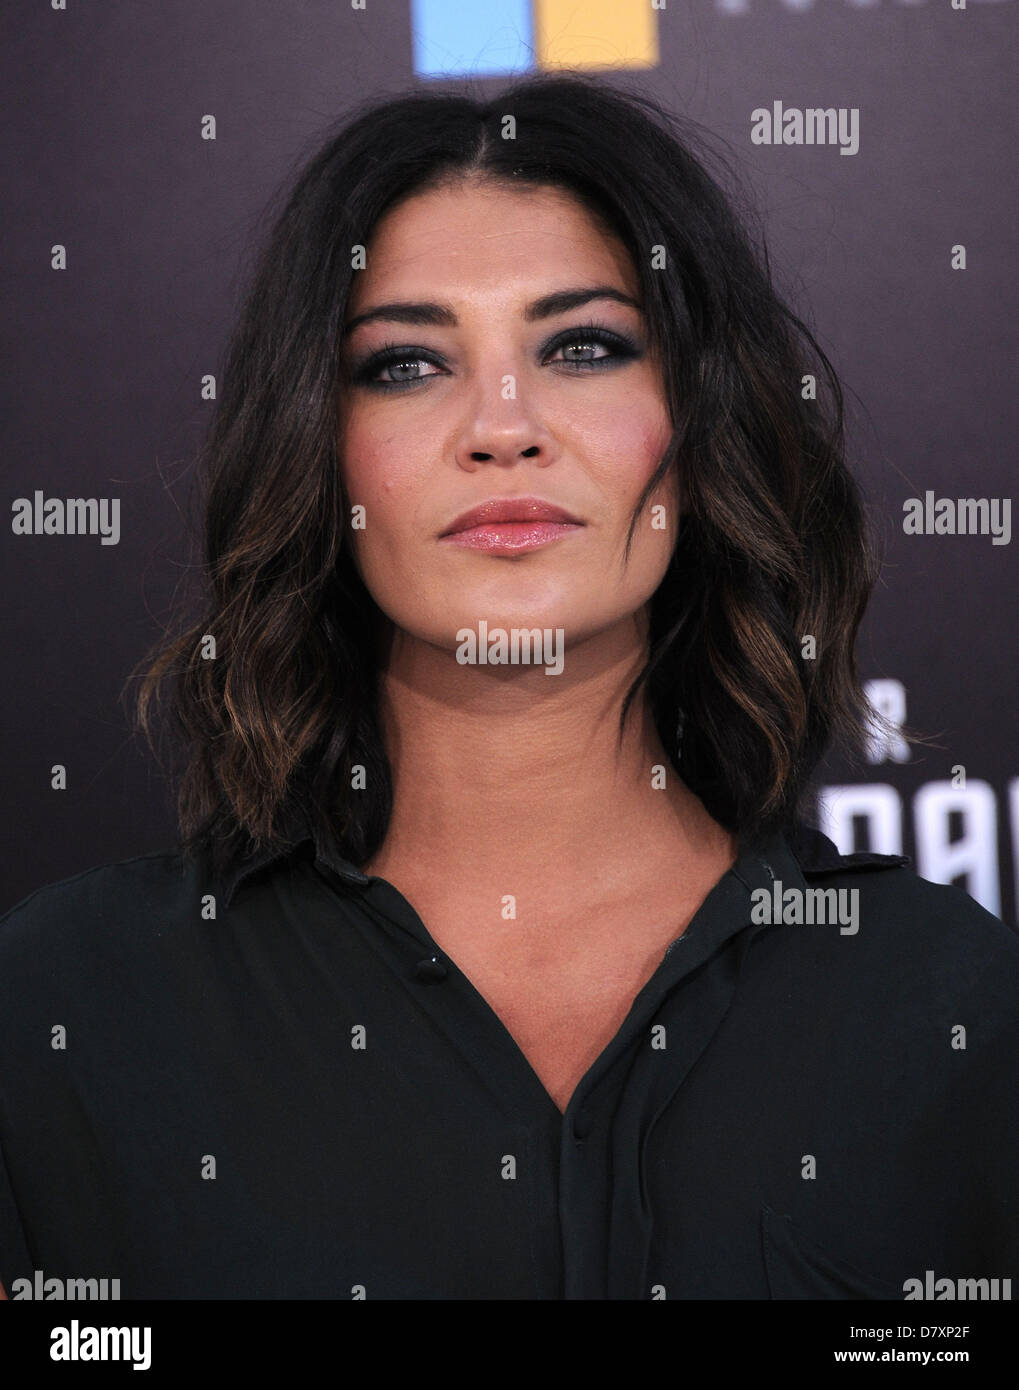 Hollywood, California, U.S. May 14, 2013. Jessica Szohr arrives for the ''Star Trek Into Darkness'' Los Angeles Premiere at the Dolby theater. (Credit Image: Credit:  Lisa O'Connor/ZUMAPRESS.com/Alamy Live News) Stock Photo